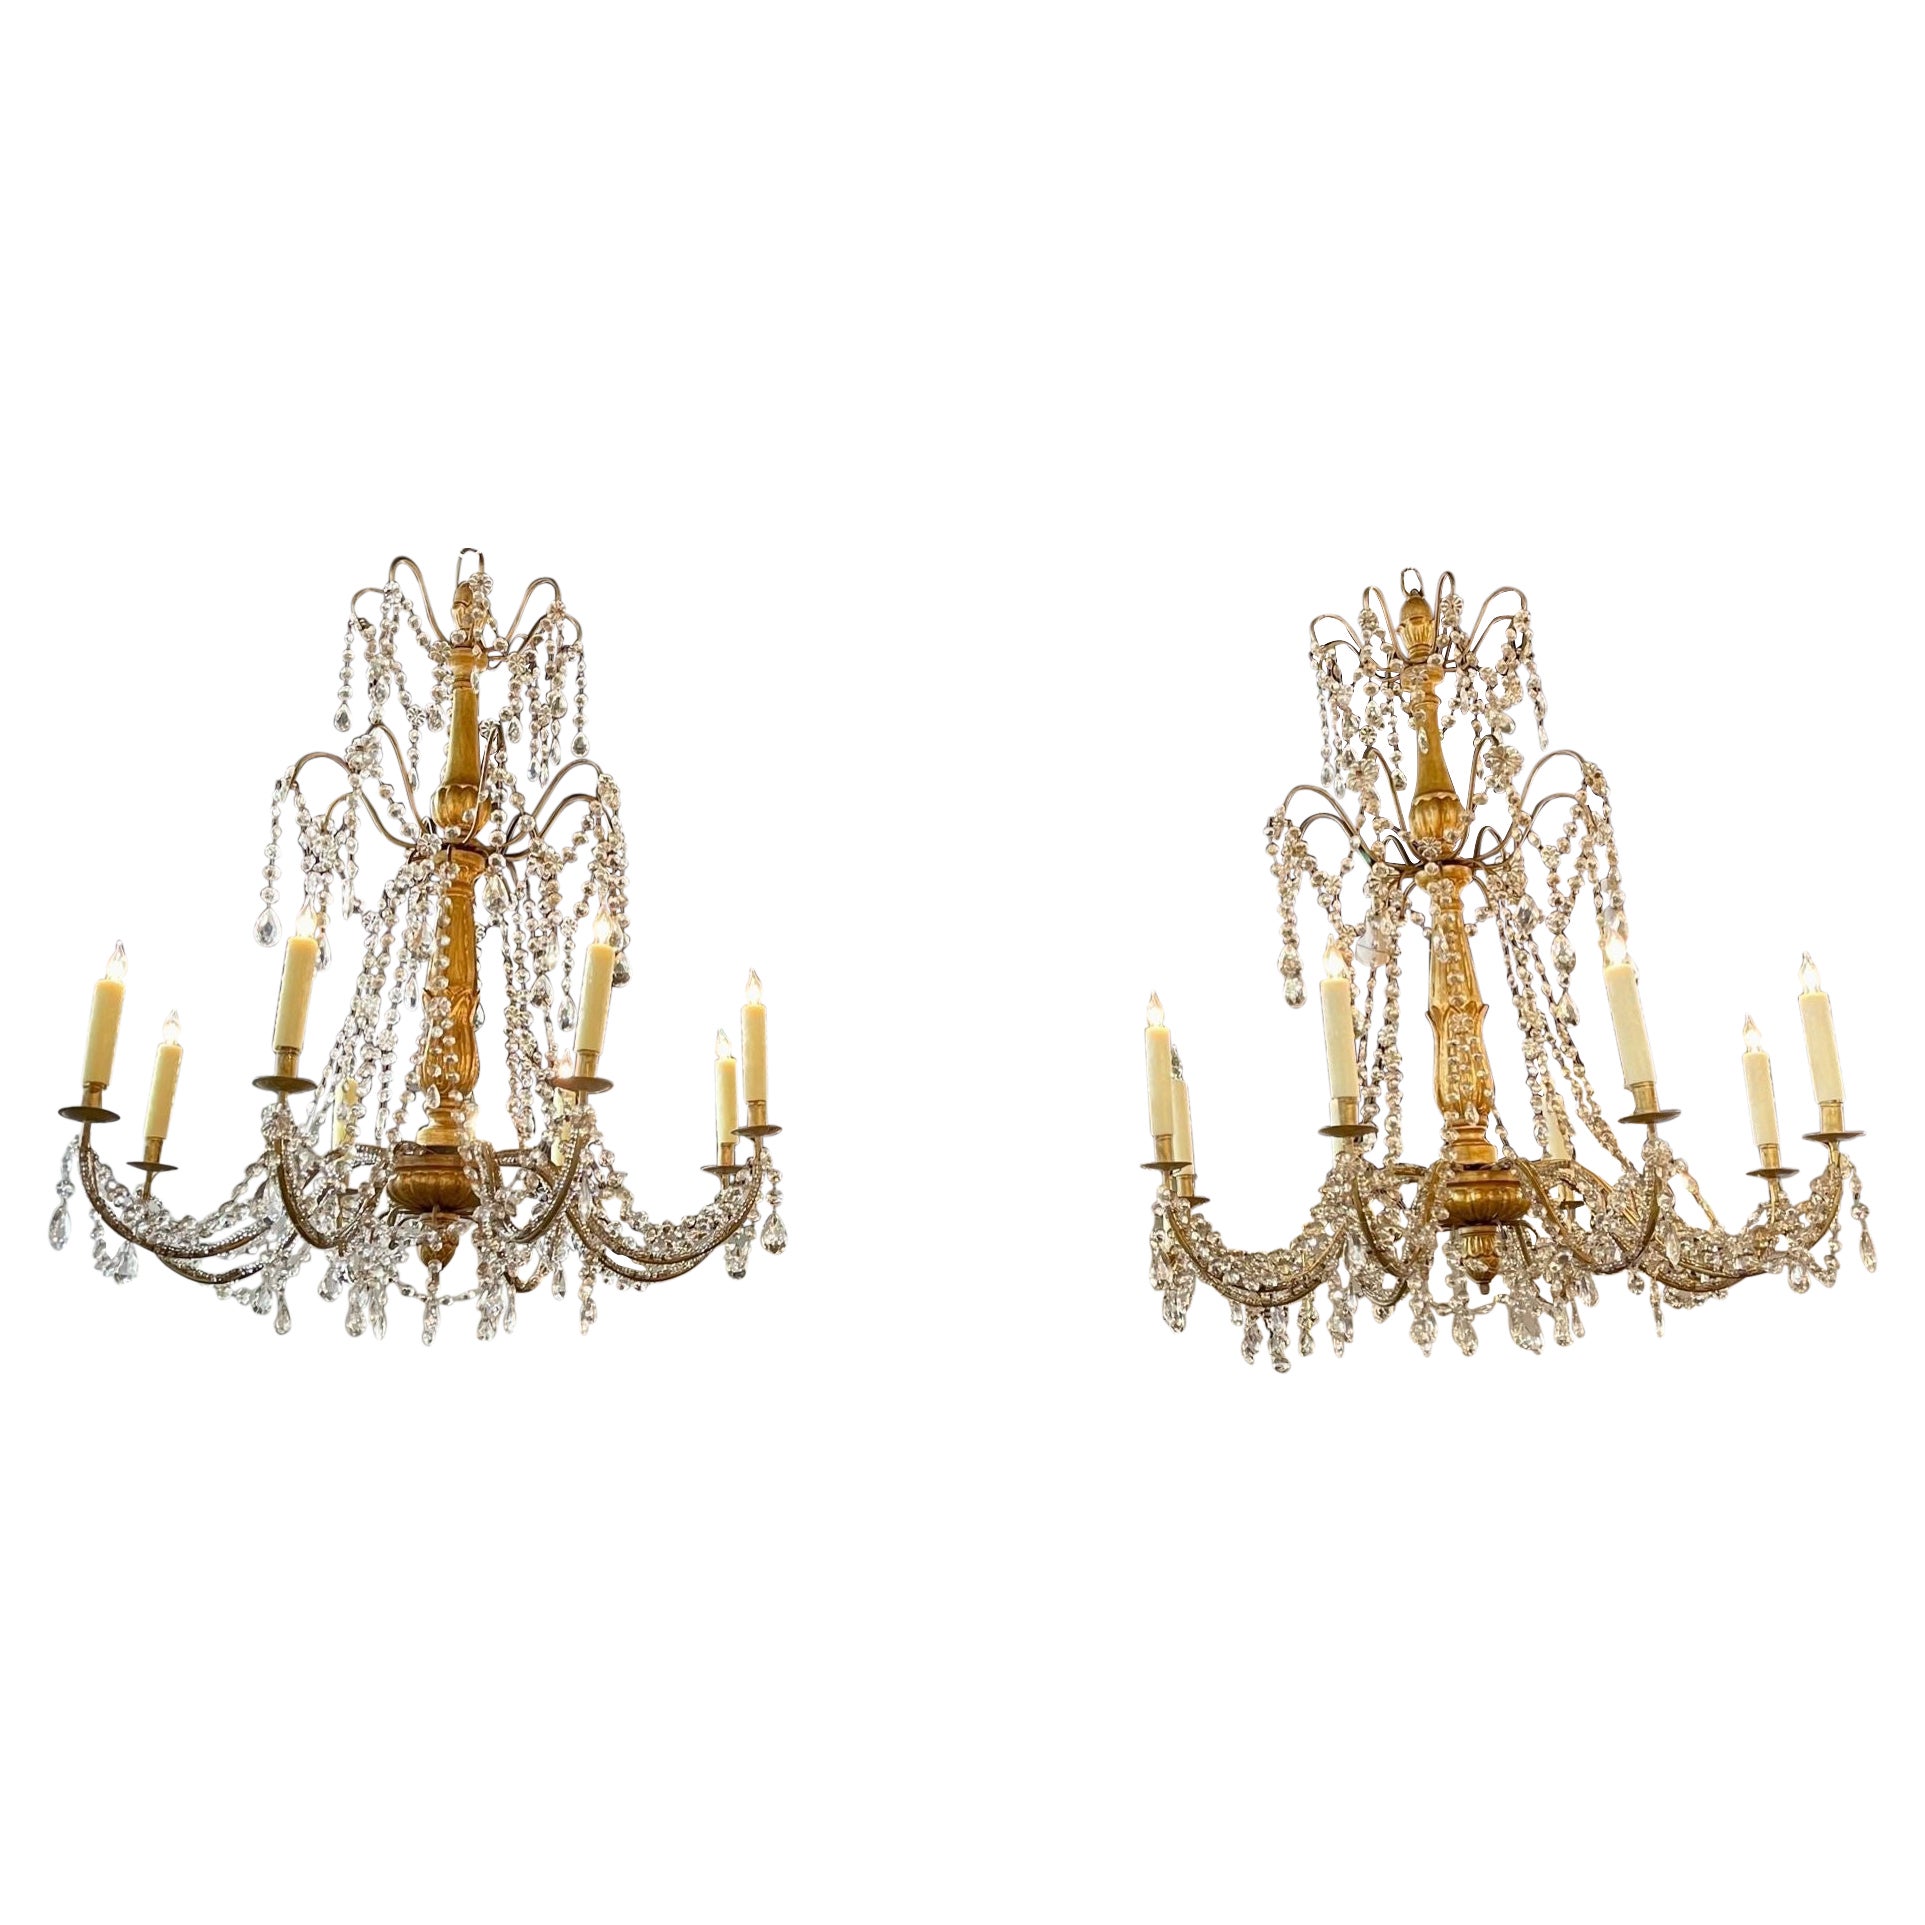 Pair of 19th Century Italian Giltwood and Crystal Chandeliers For Sale